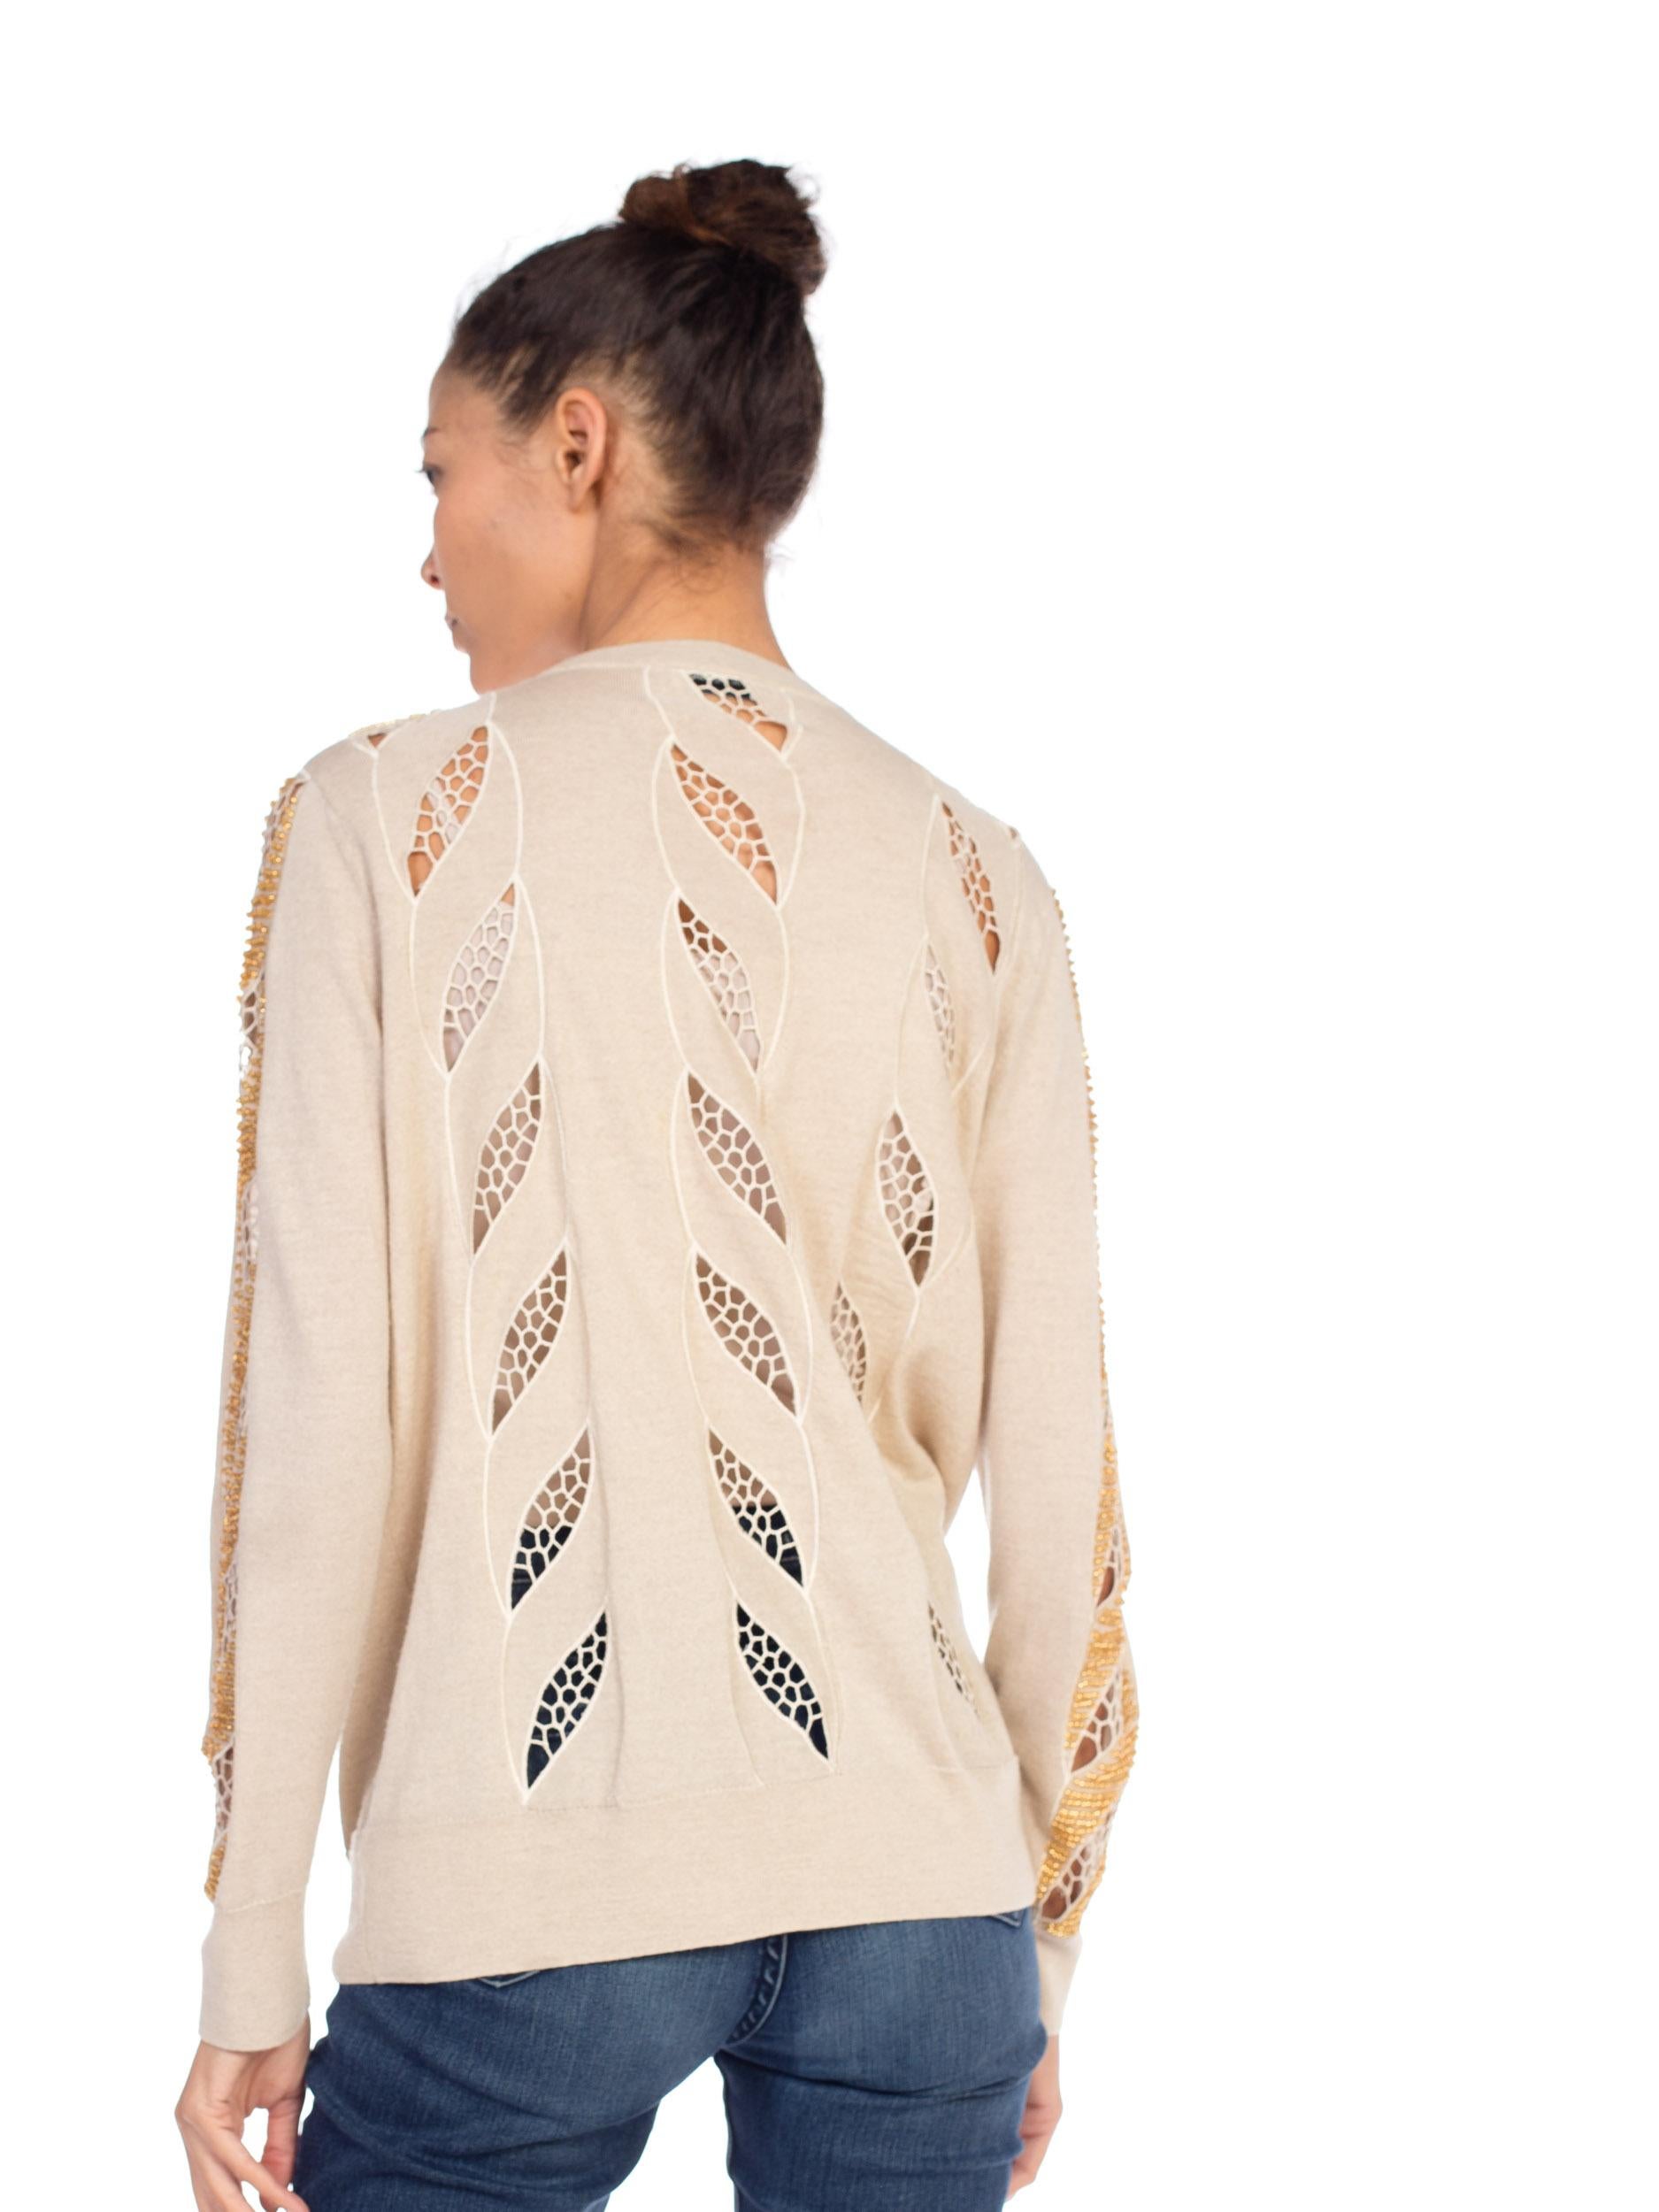 Dries Van Noten Lace Cut Out Gold Beaded Sweater  6